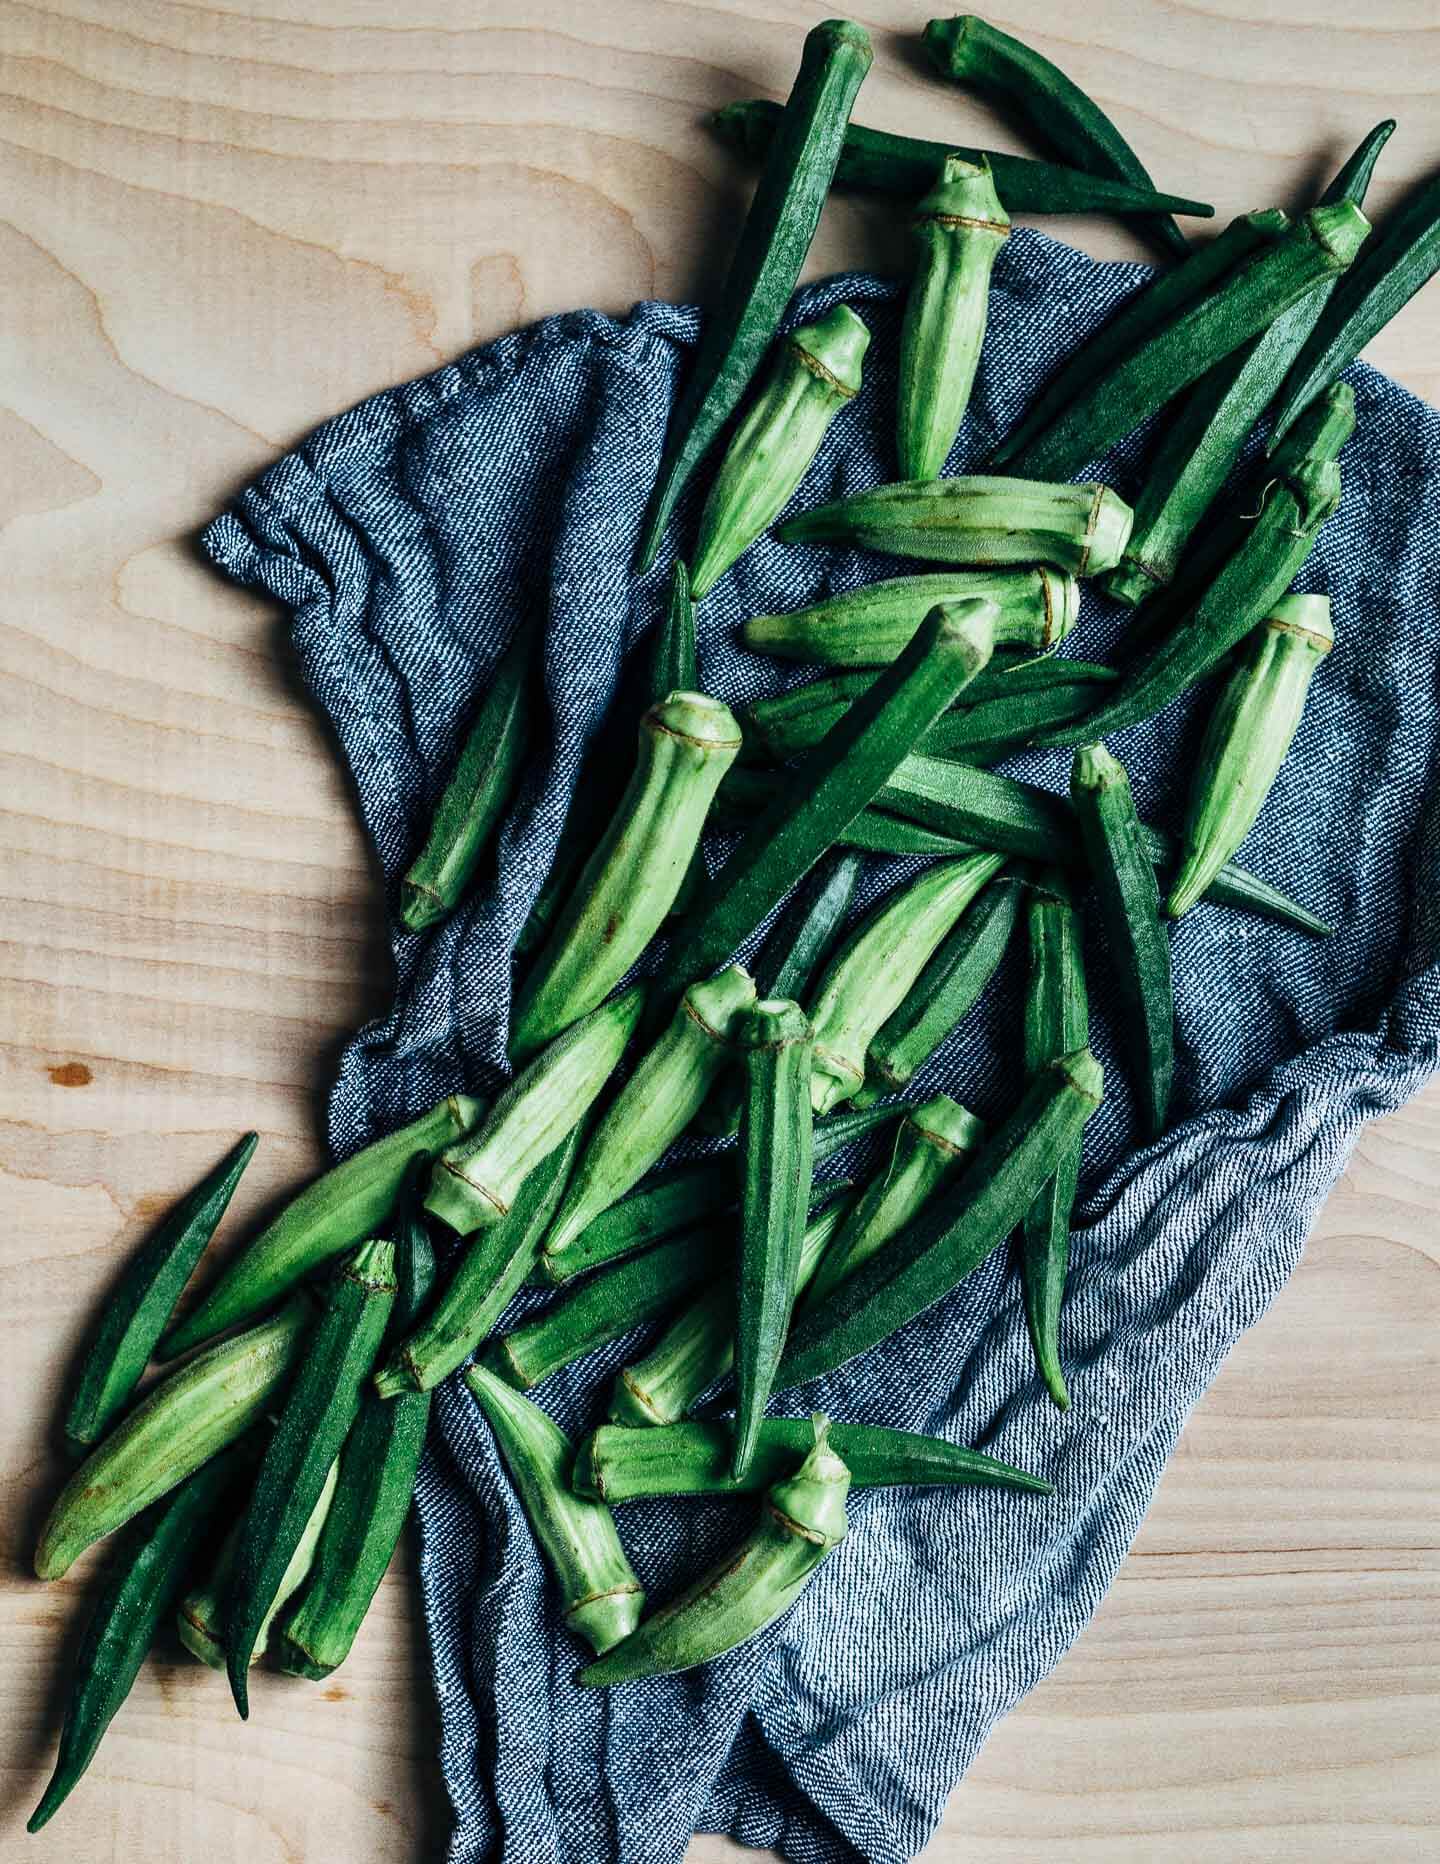 Fresh summer okra, ready to be roasted.